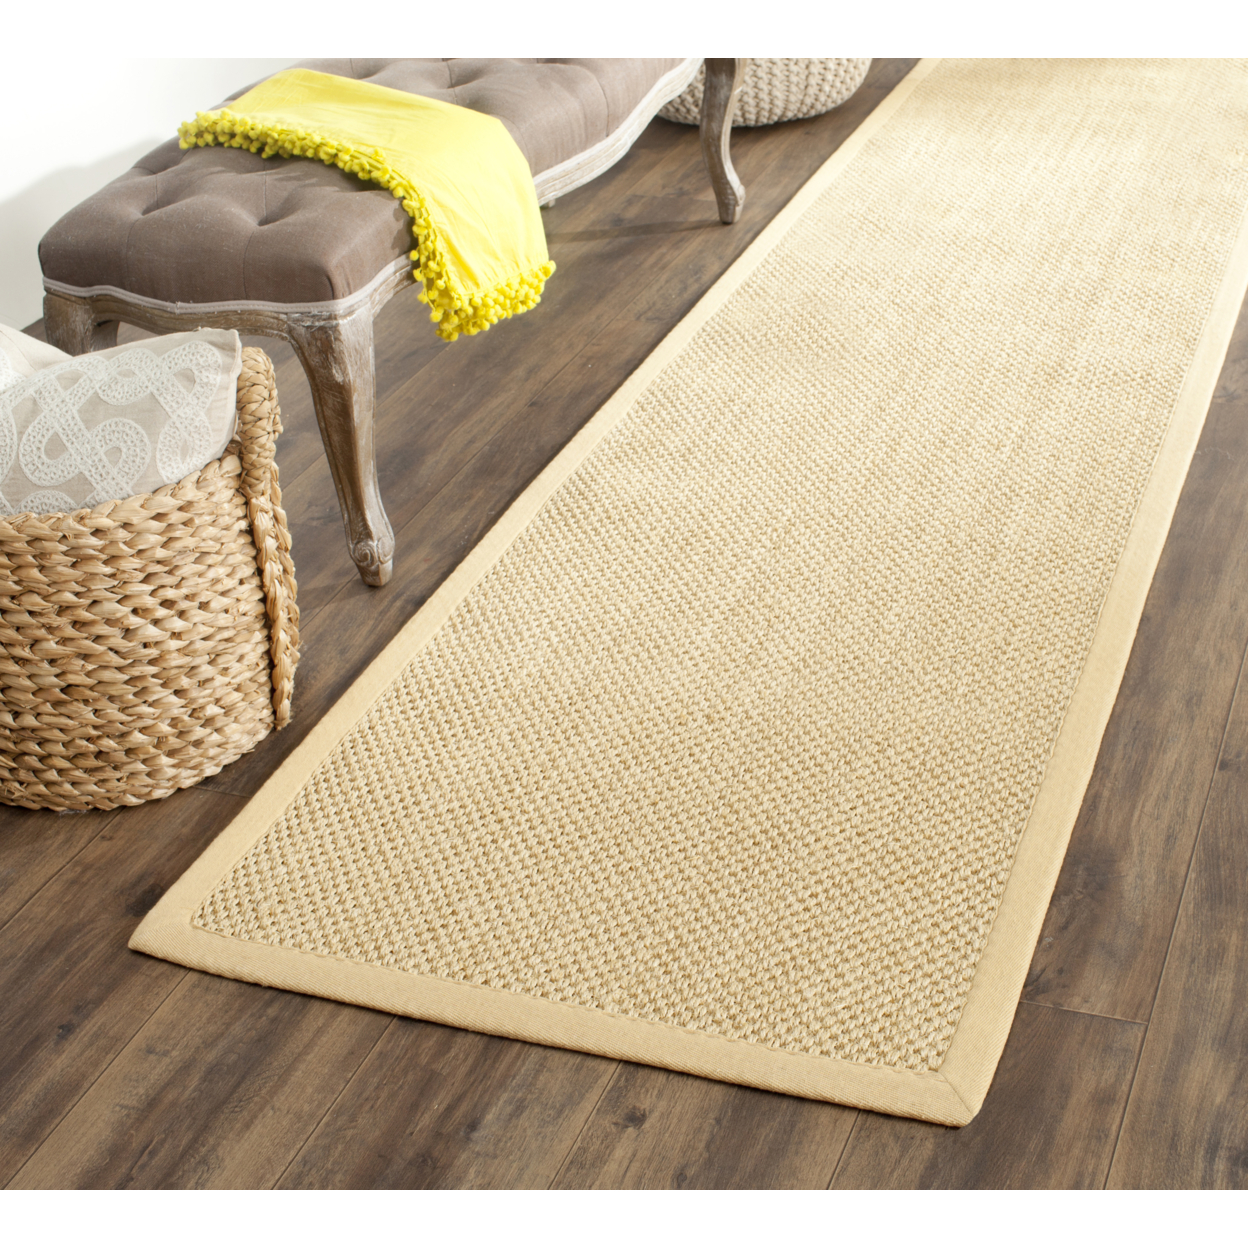 SAFAVIEH Natural Fiber Collection NF443A Maize/Wheat Rug - 8' Square